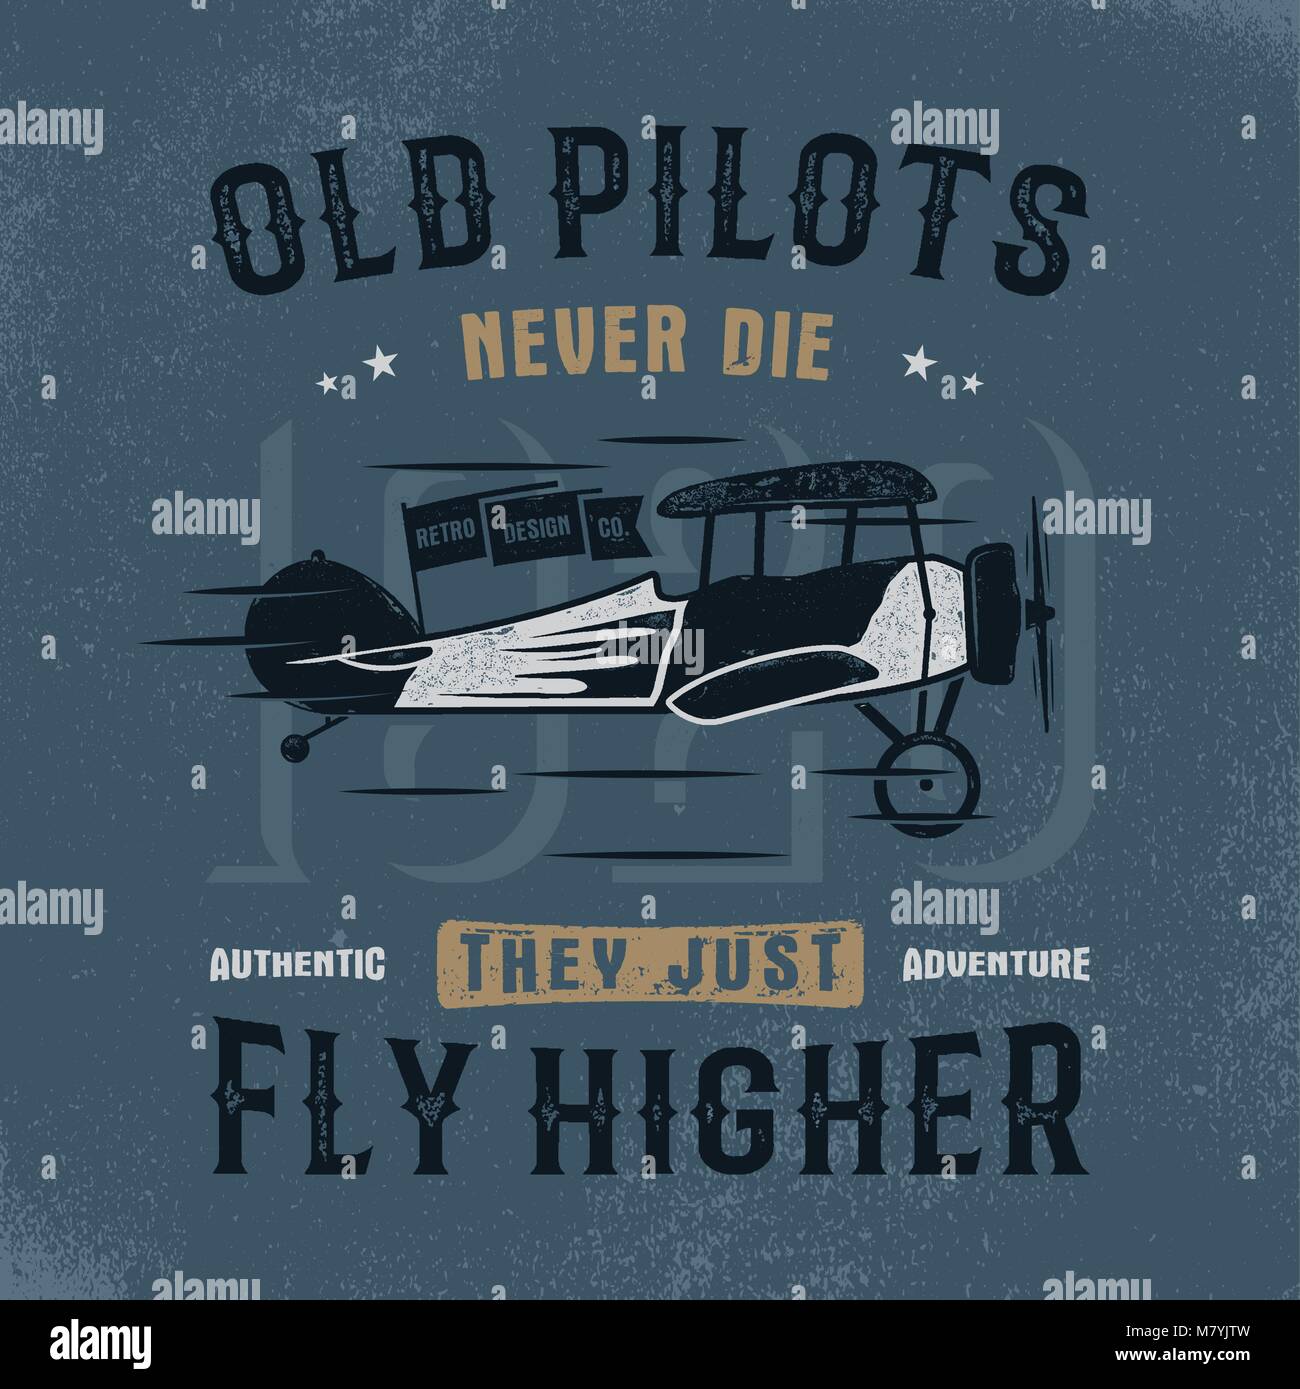 Vintage hand drawn tee graphic design. Old pilots quote. Authentic adventure sign. Retro typography poster. apparel, t shirt template. Retro colors airplane. Stock vector illustration, background Stock Vector